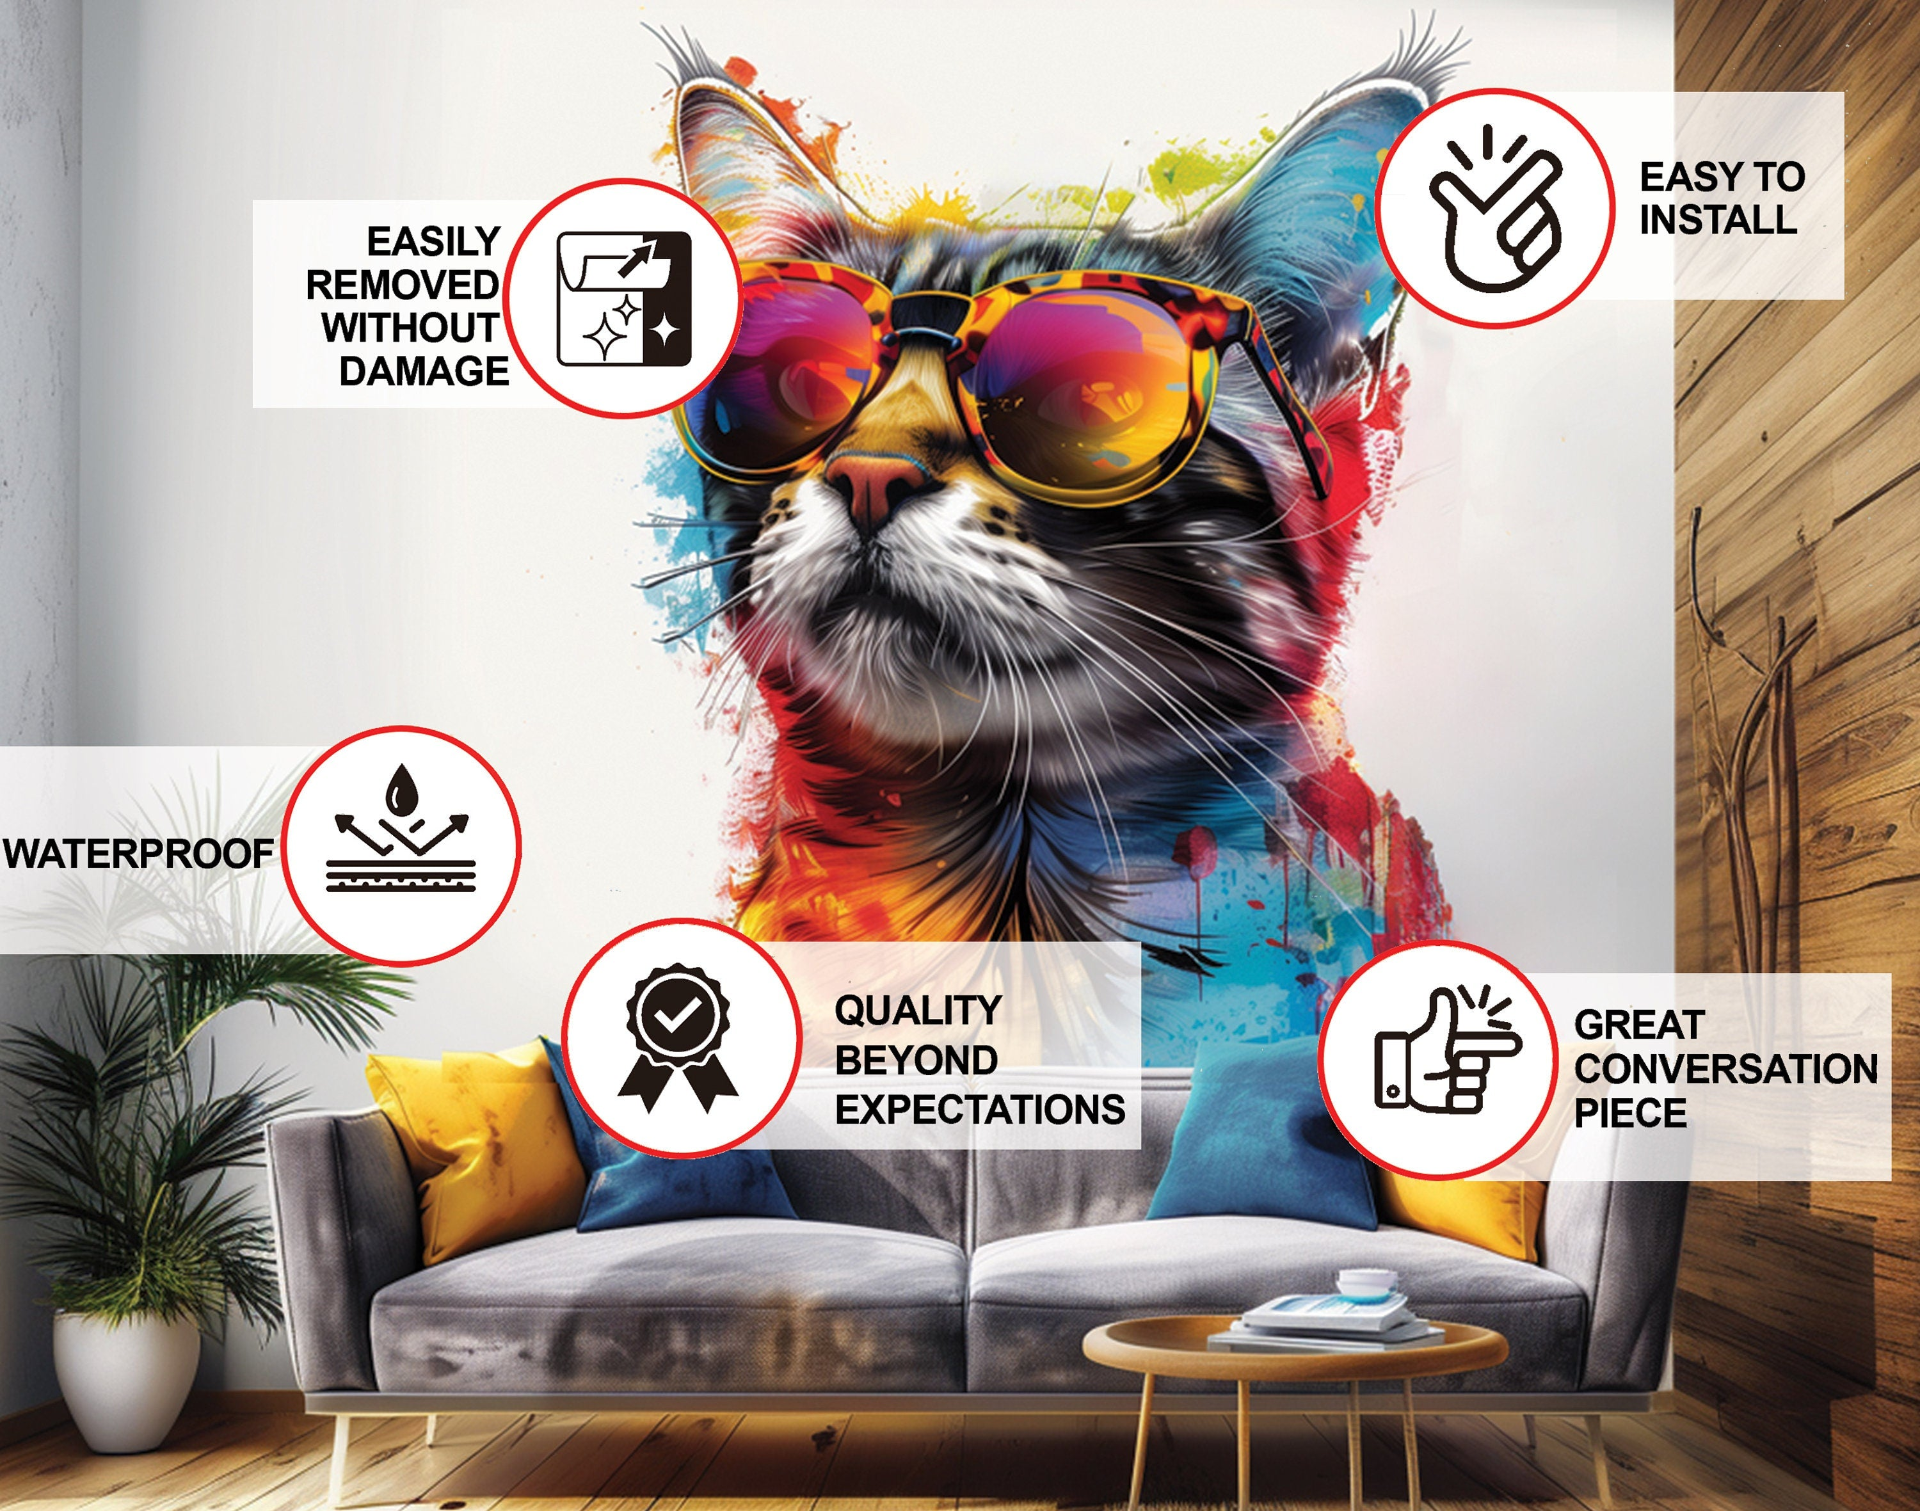 Colorful Maine Coon Cat Wall Sticker with Sunglasses - Modern Kittent Art Decal, Goodies N Stuff